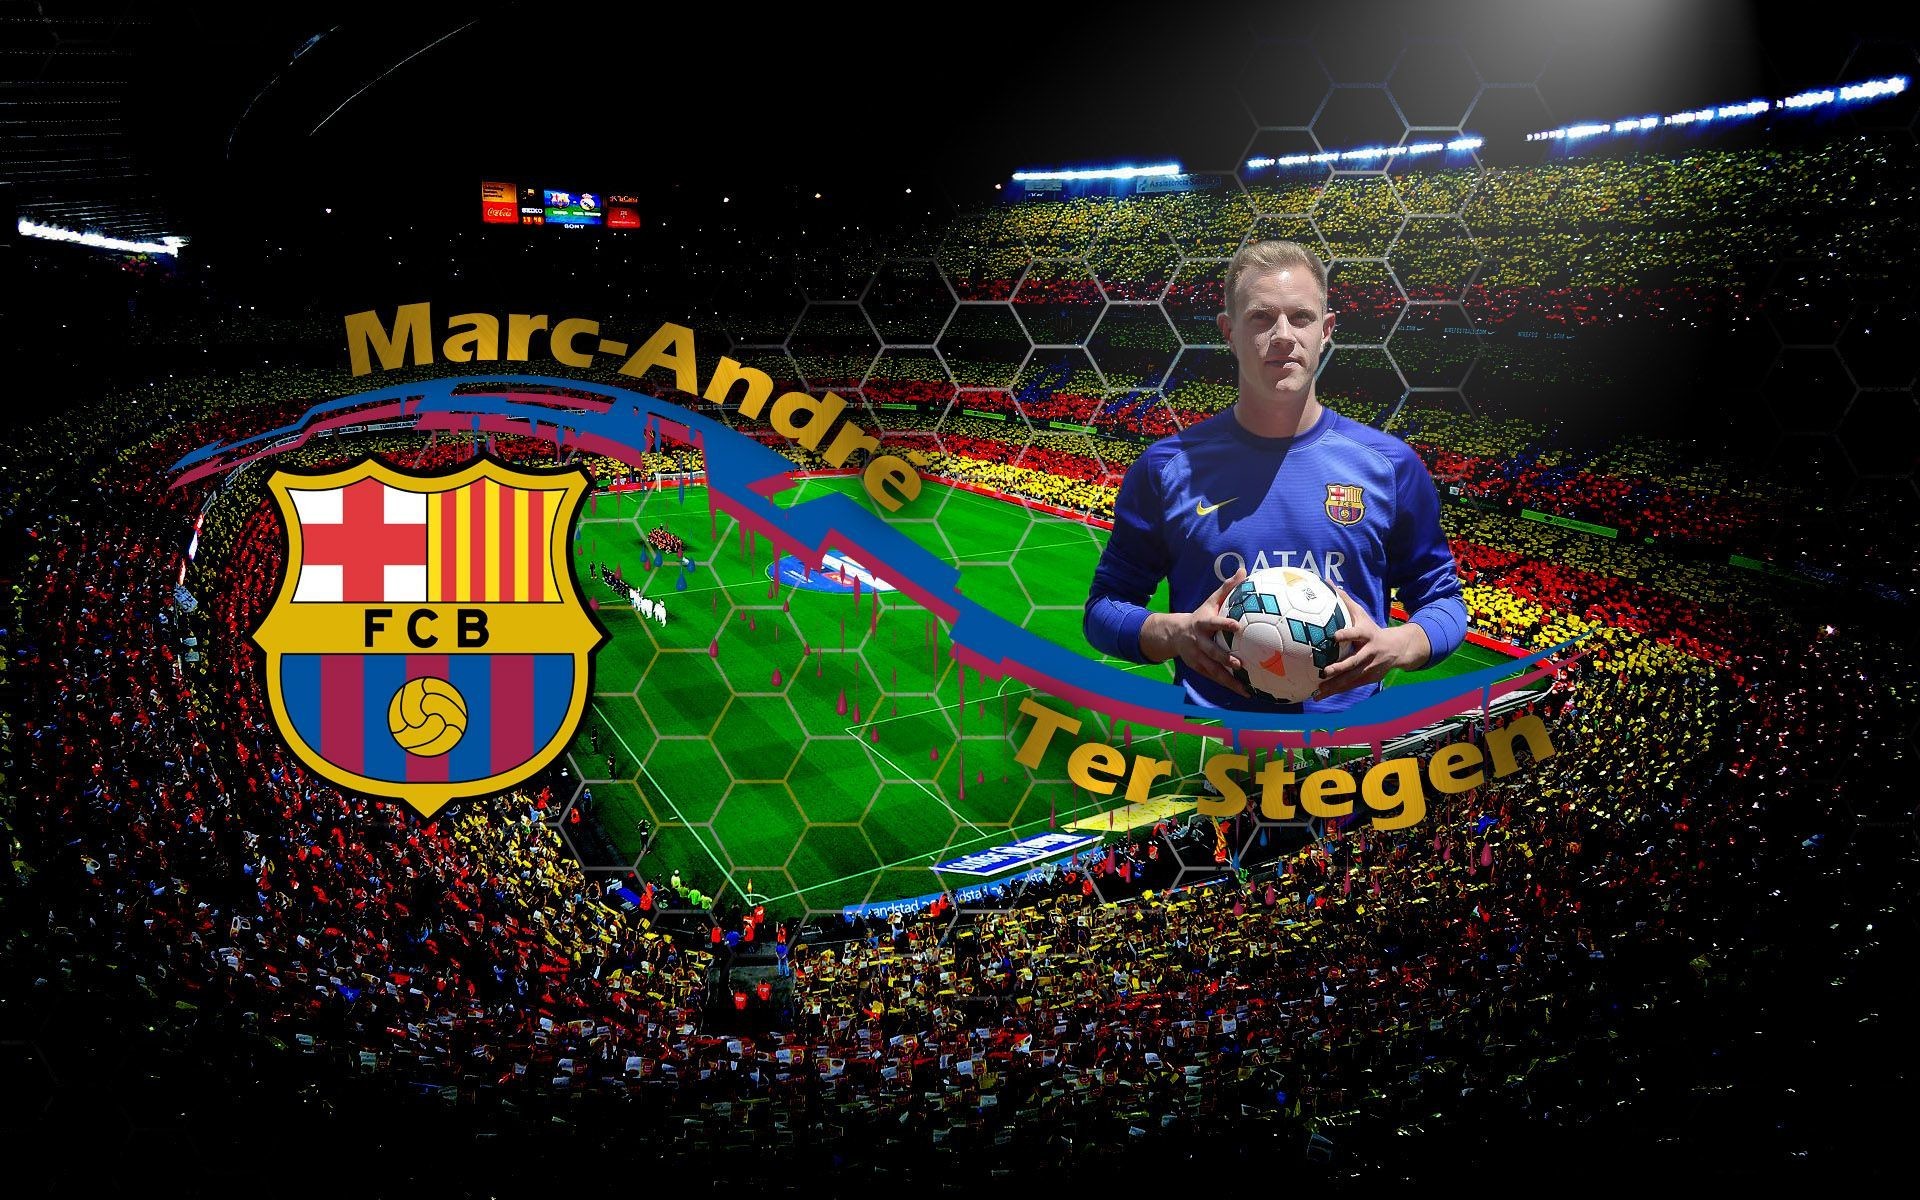 1920x1200 ... Wallpapers;  Most Beautiful HQ Definition Images of FCB, Full  HD 1080p Desktop Images for PC&Mac ...